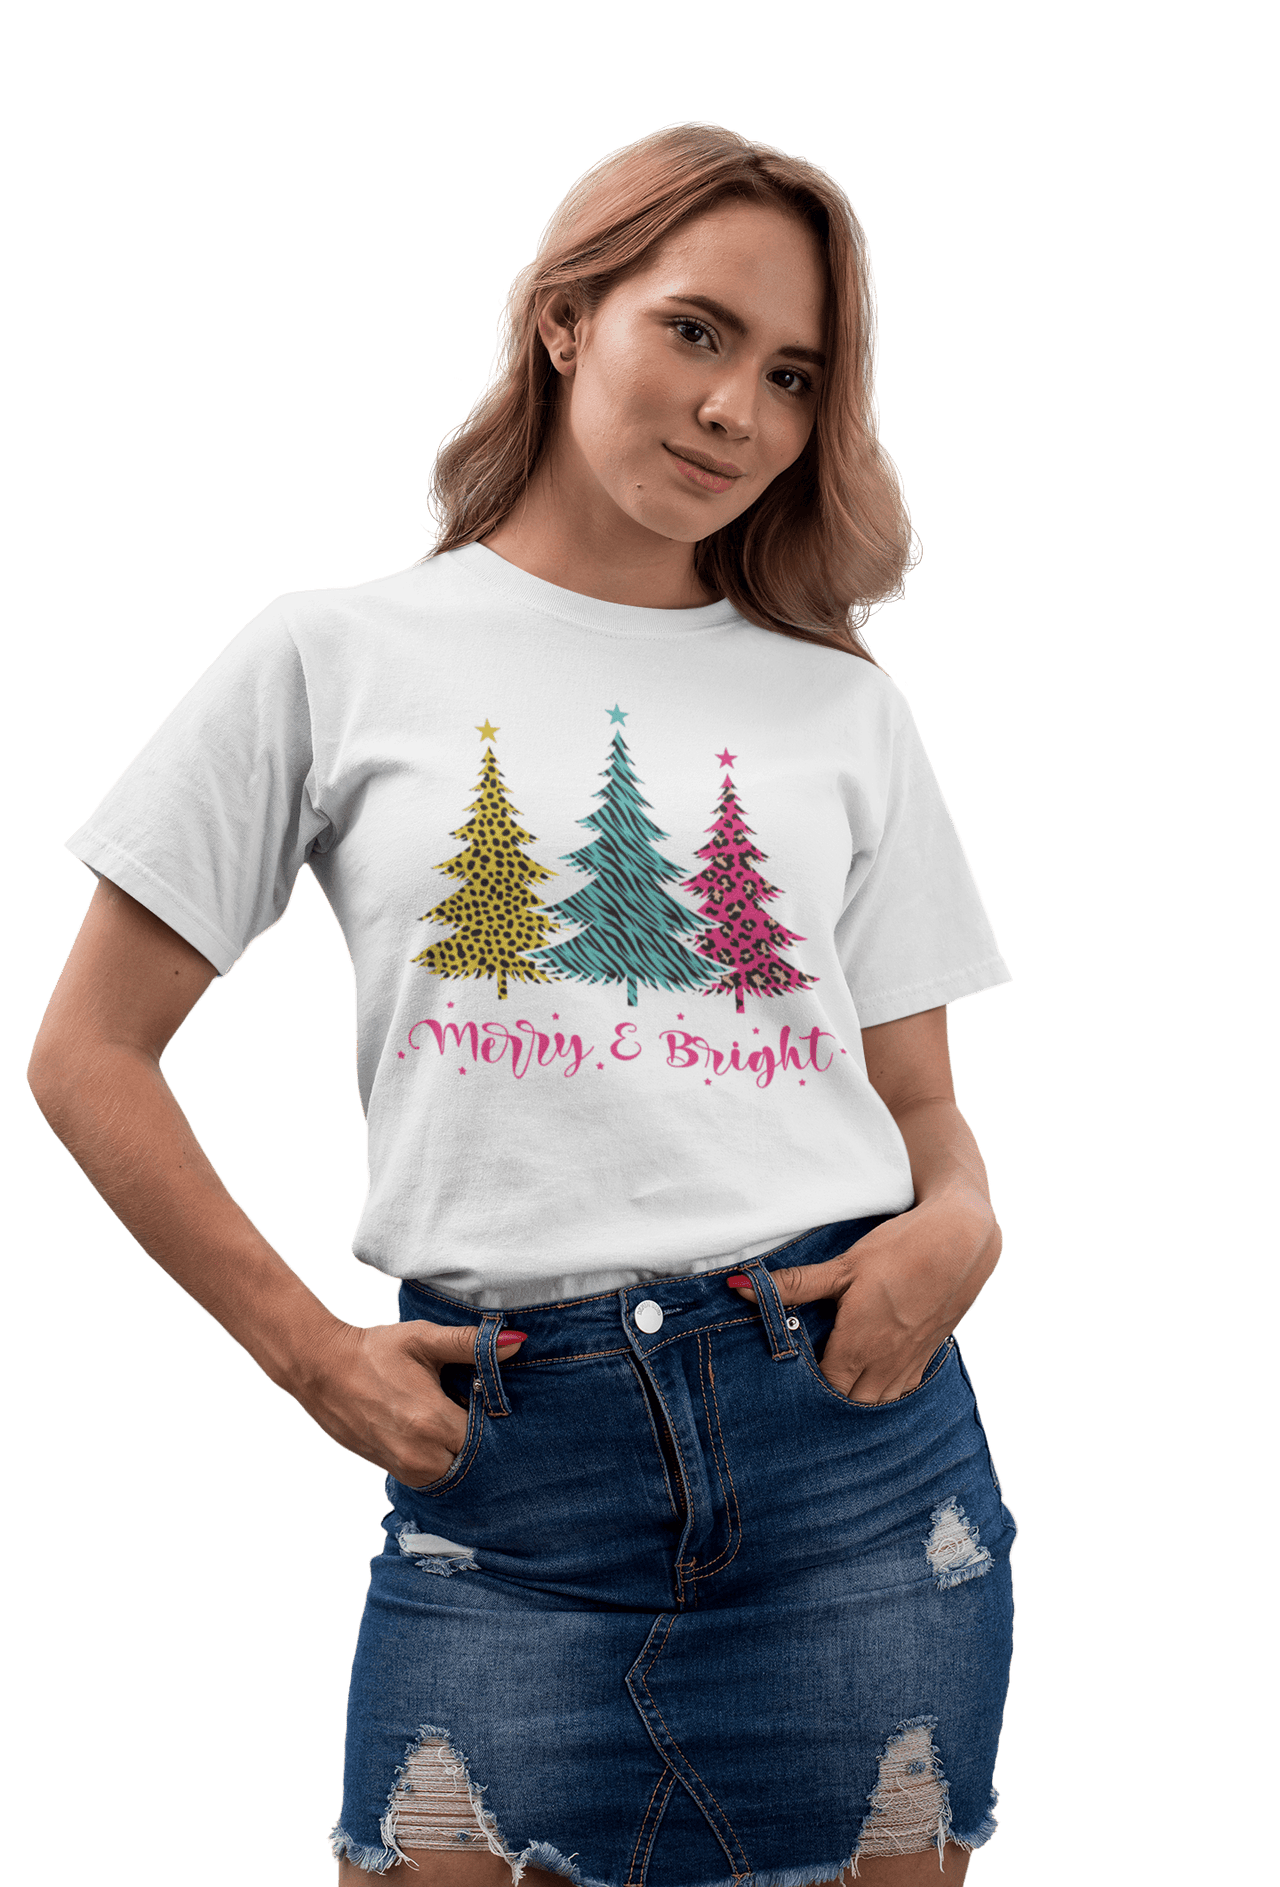 Unisex Triple Christmas Tree Adult for Men and Women Graphic T-Shirt For Men 8Ball